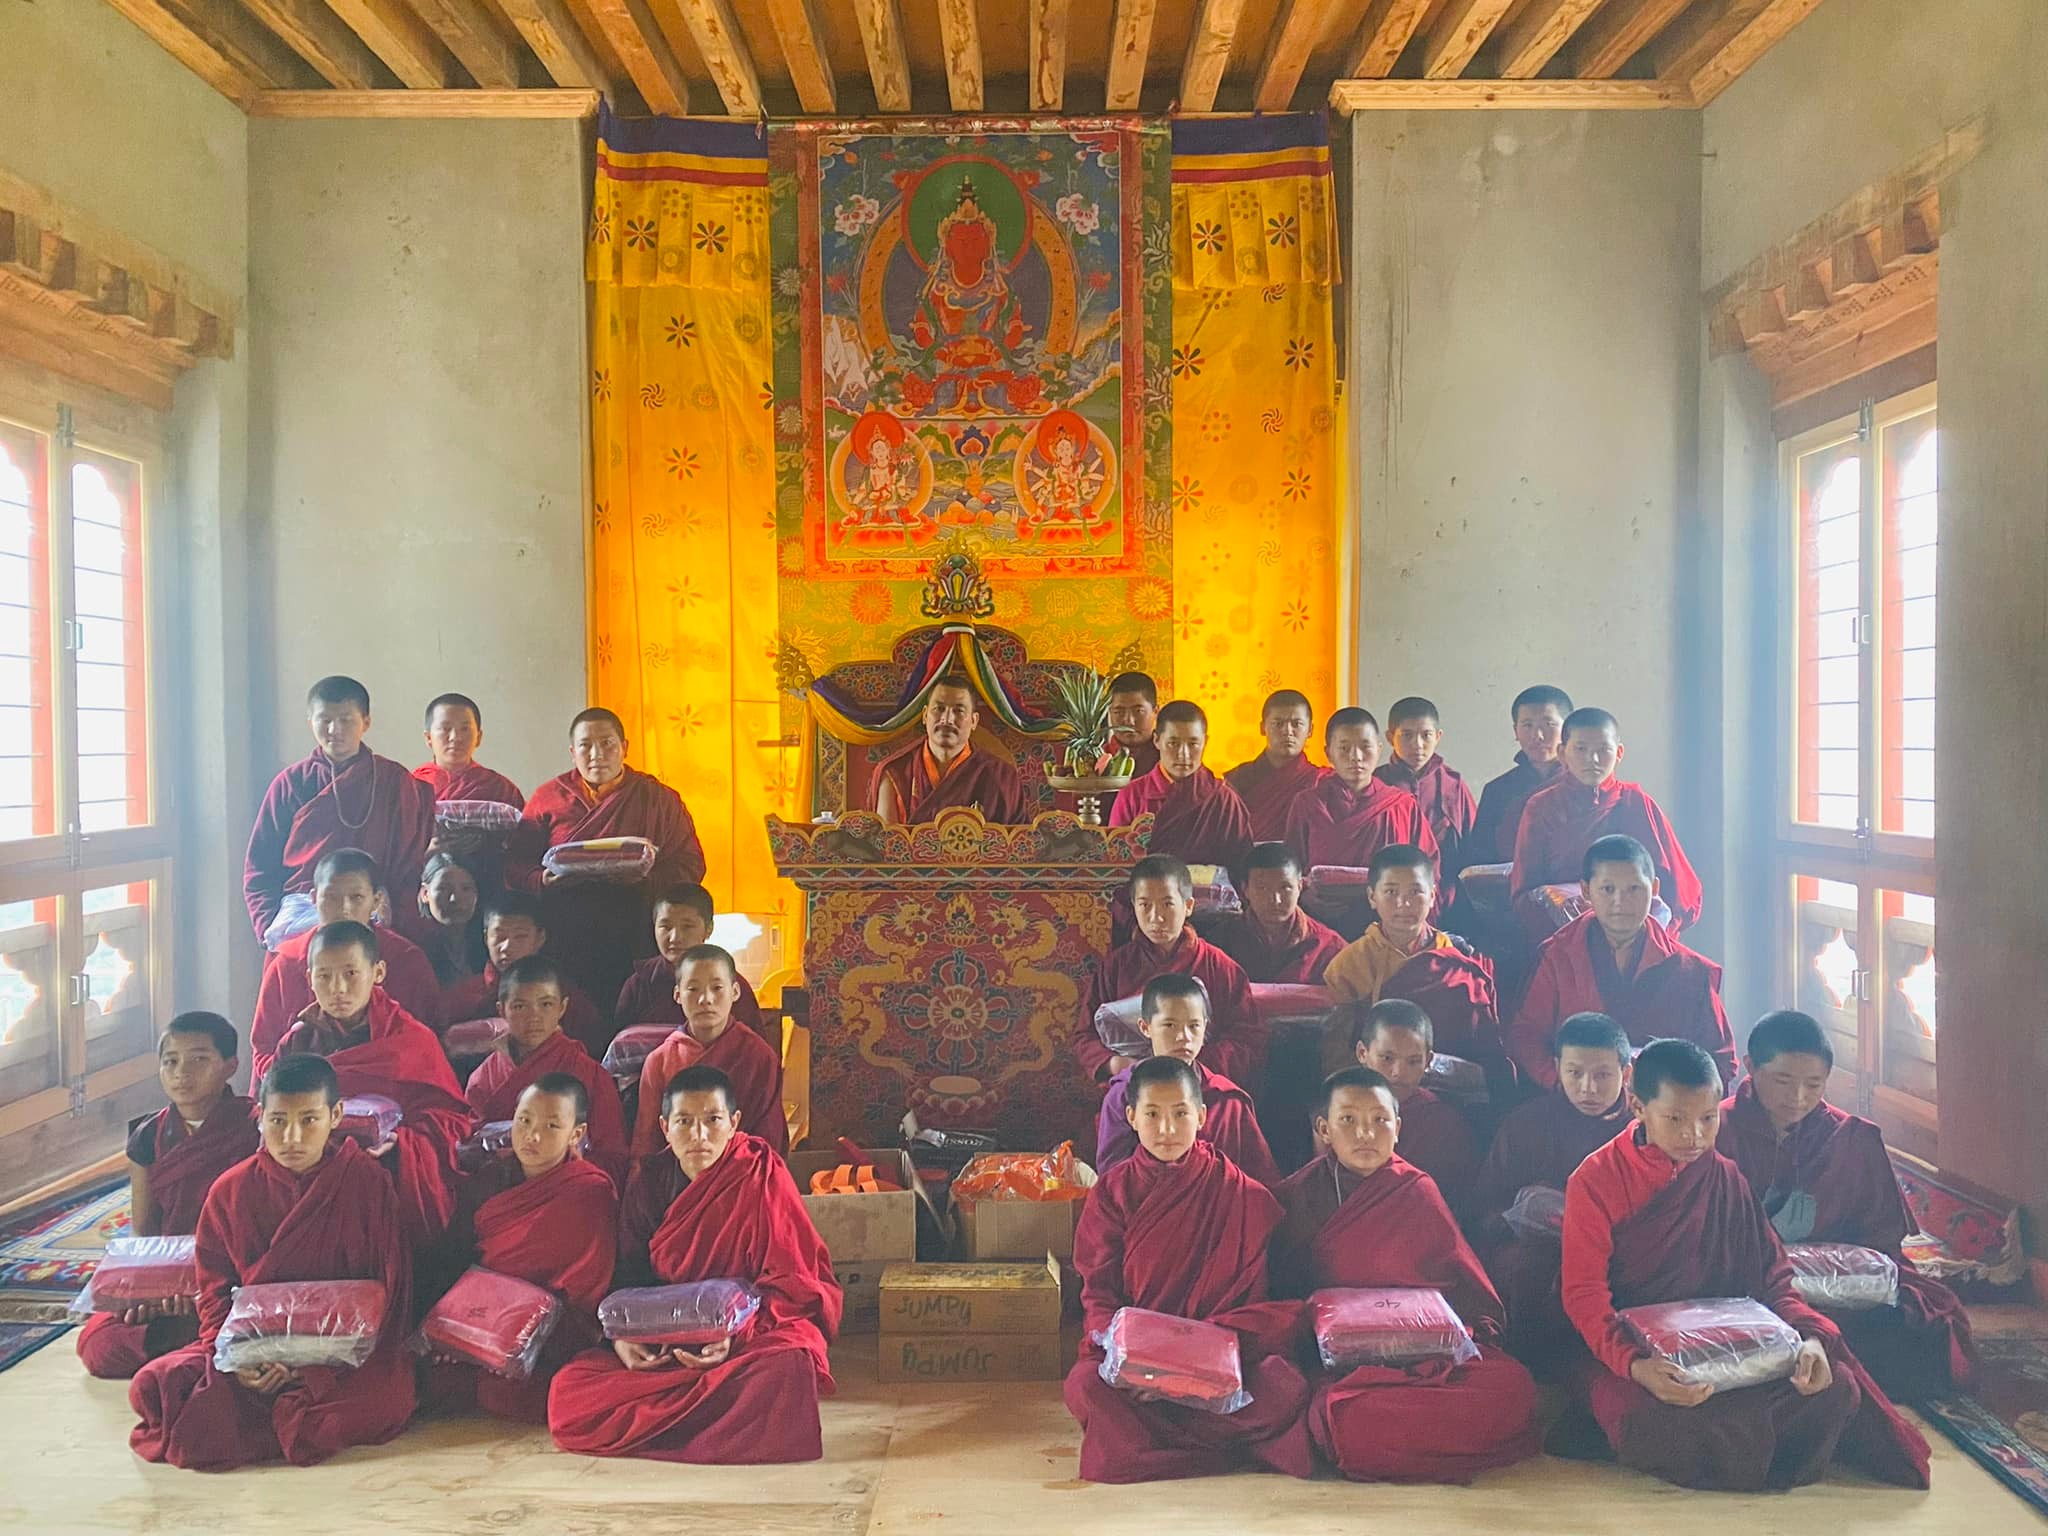 Sponsors from Hongkong, Bhutan and Thailand provided set of monks dress and slippers to the monks and nuns under the foundation.